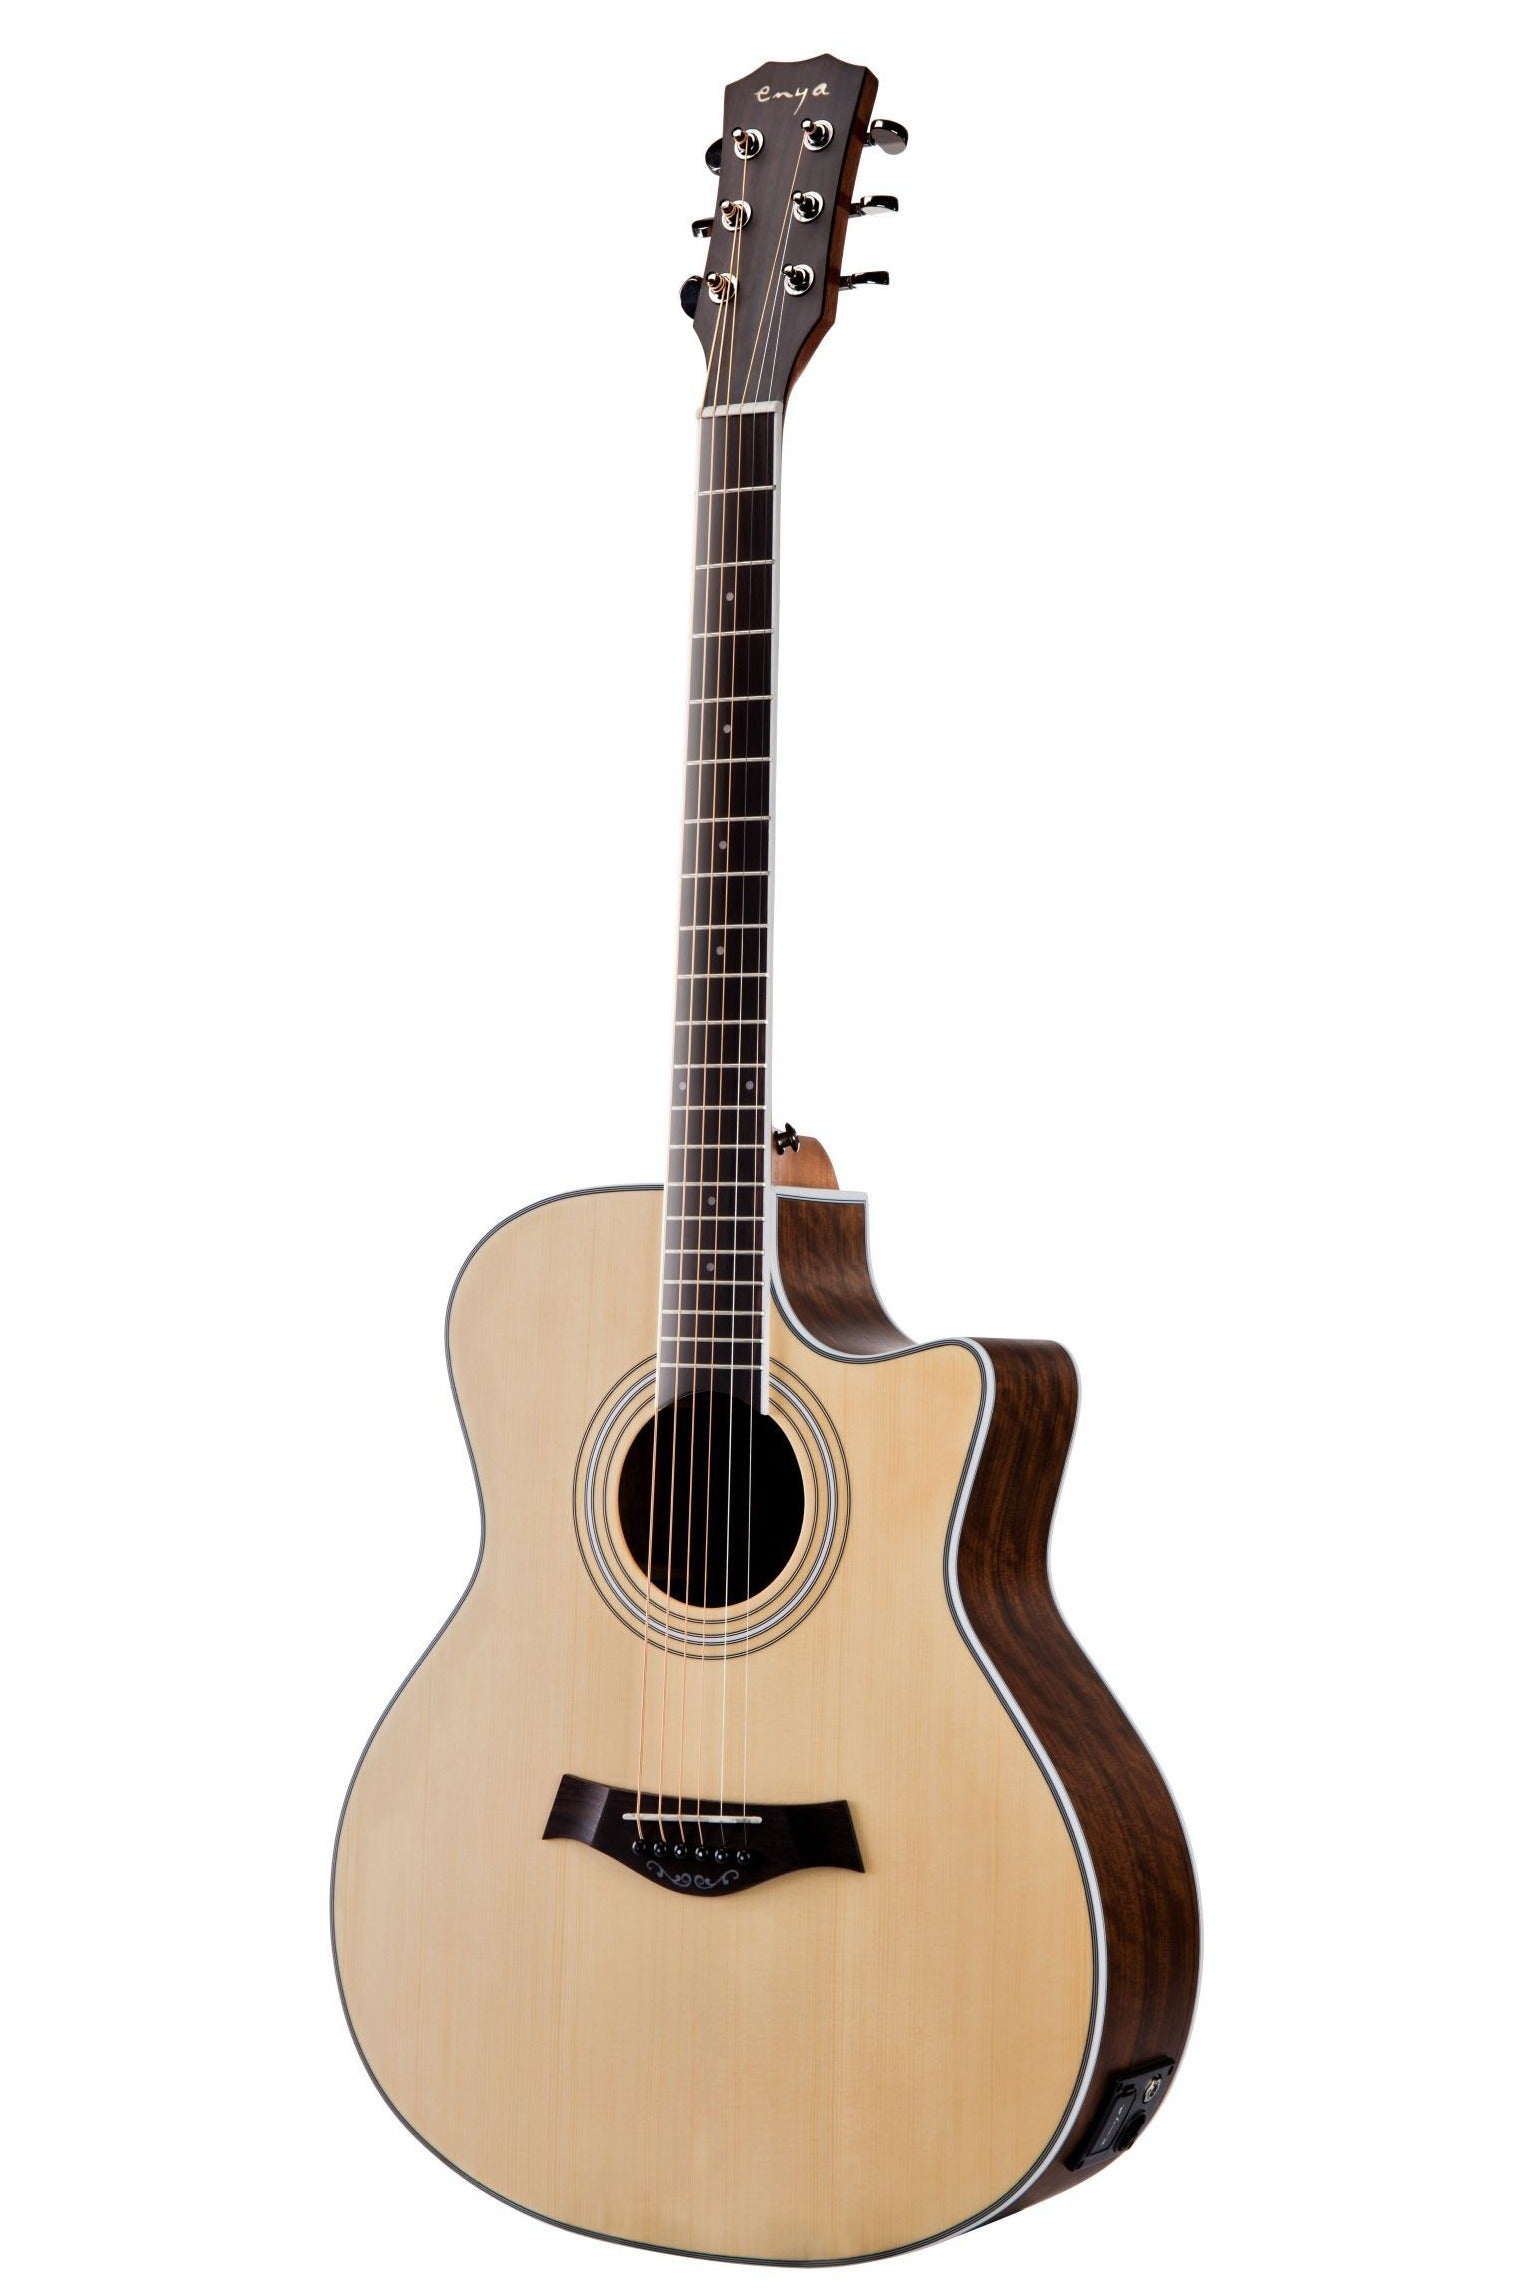 Enya EAG-40NA 40" Cutaway Acoustic Guitar AAA Englemann Spruce Top With/Without EQ With Bag And Accessories | ENYA , Zoso Music